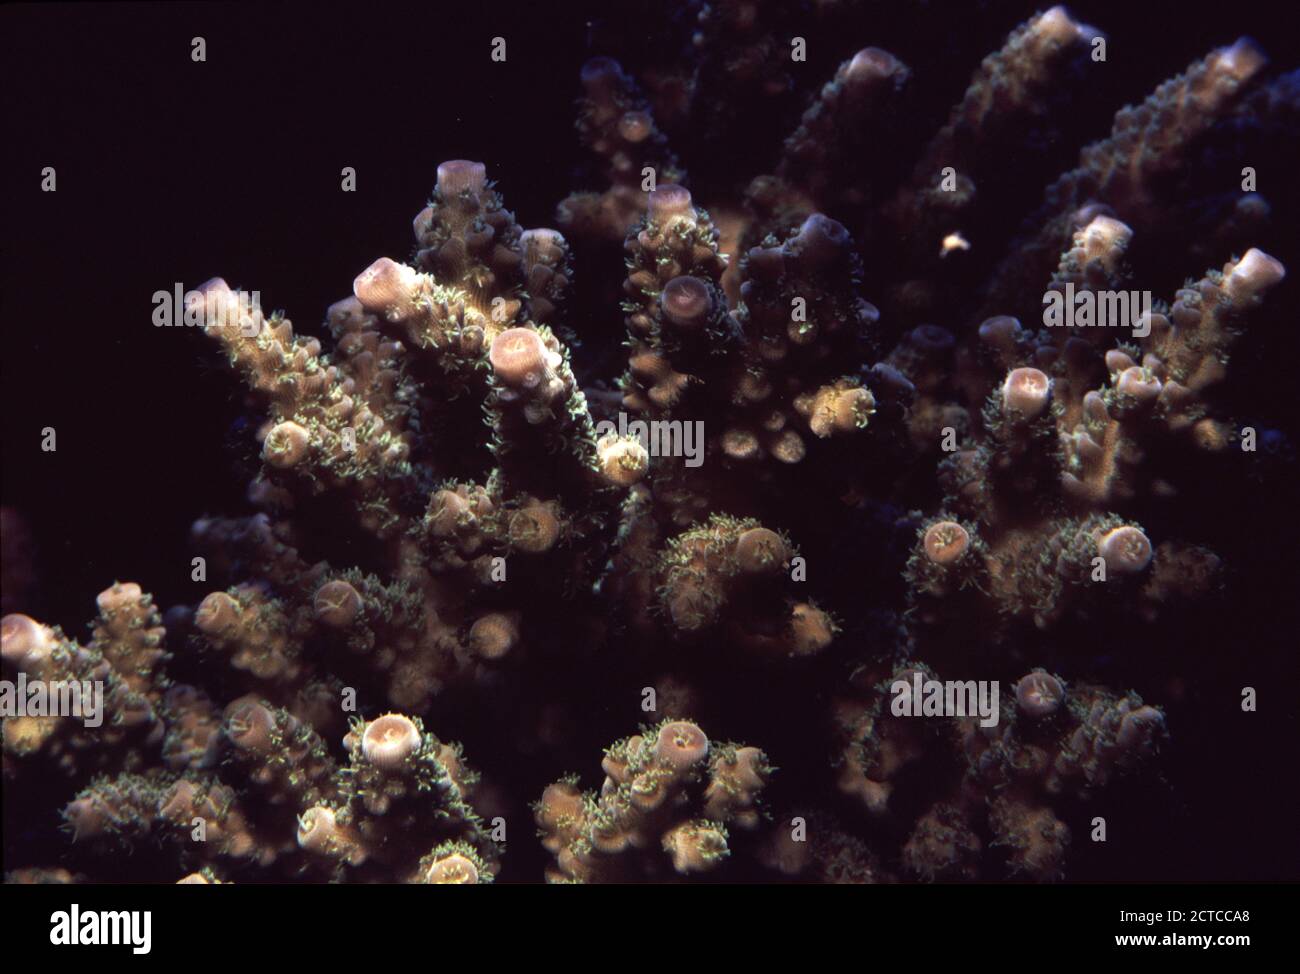 Staghorn stony coral, Acropora sp. Stock Photo